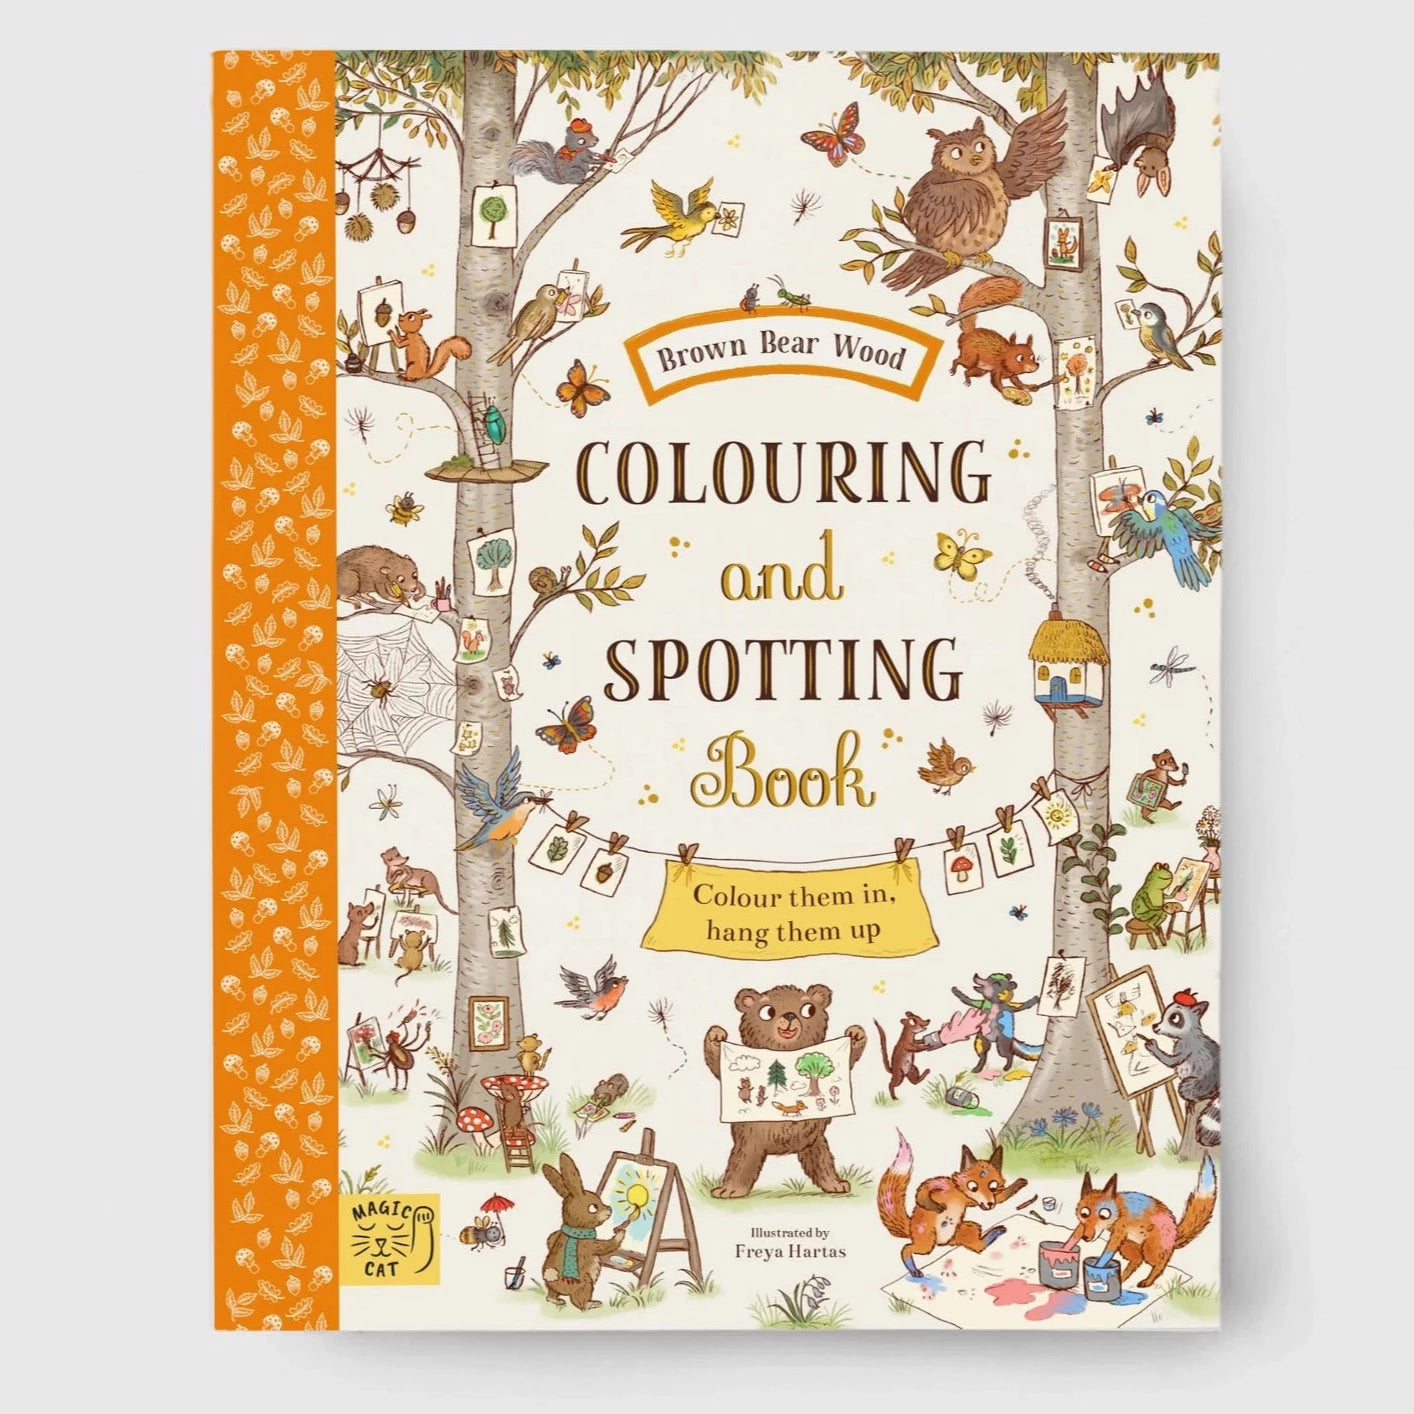 Brown Bear Wood: Colouring & Spotting Book